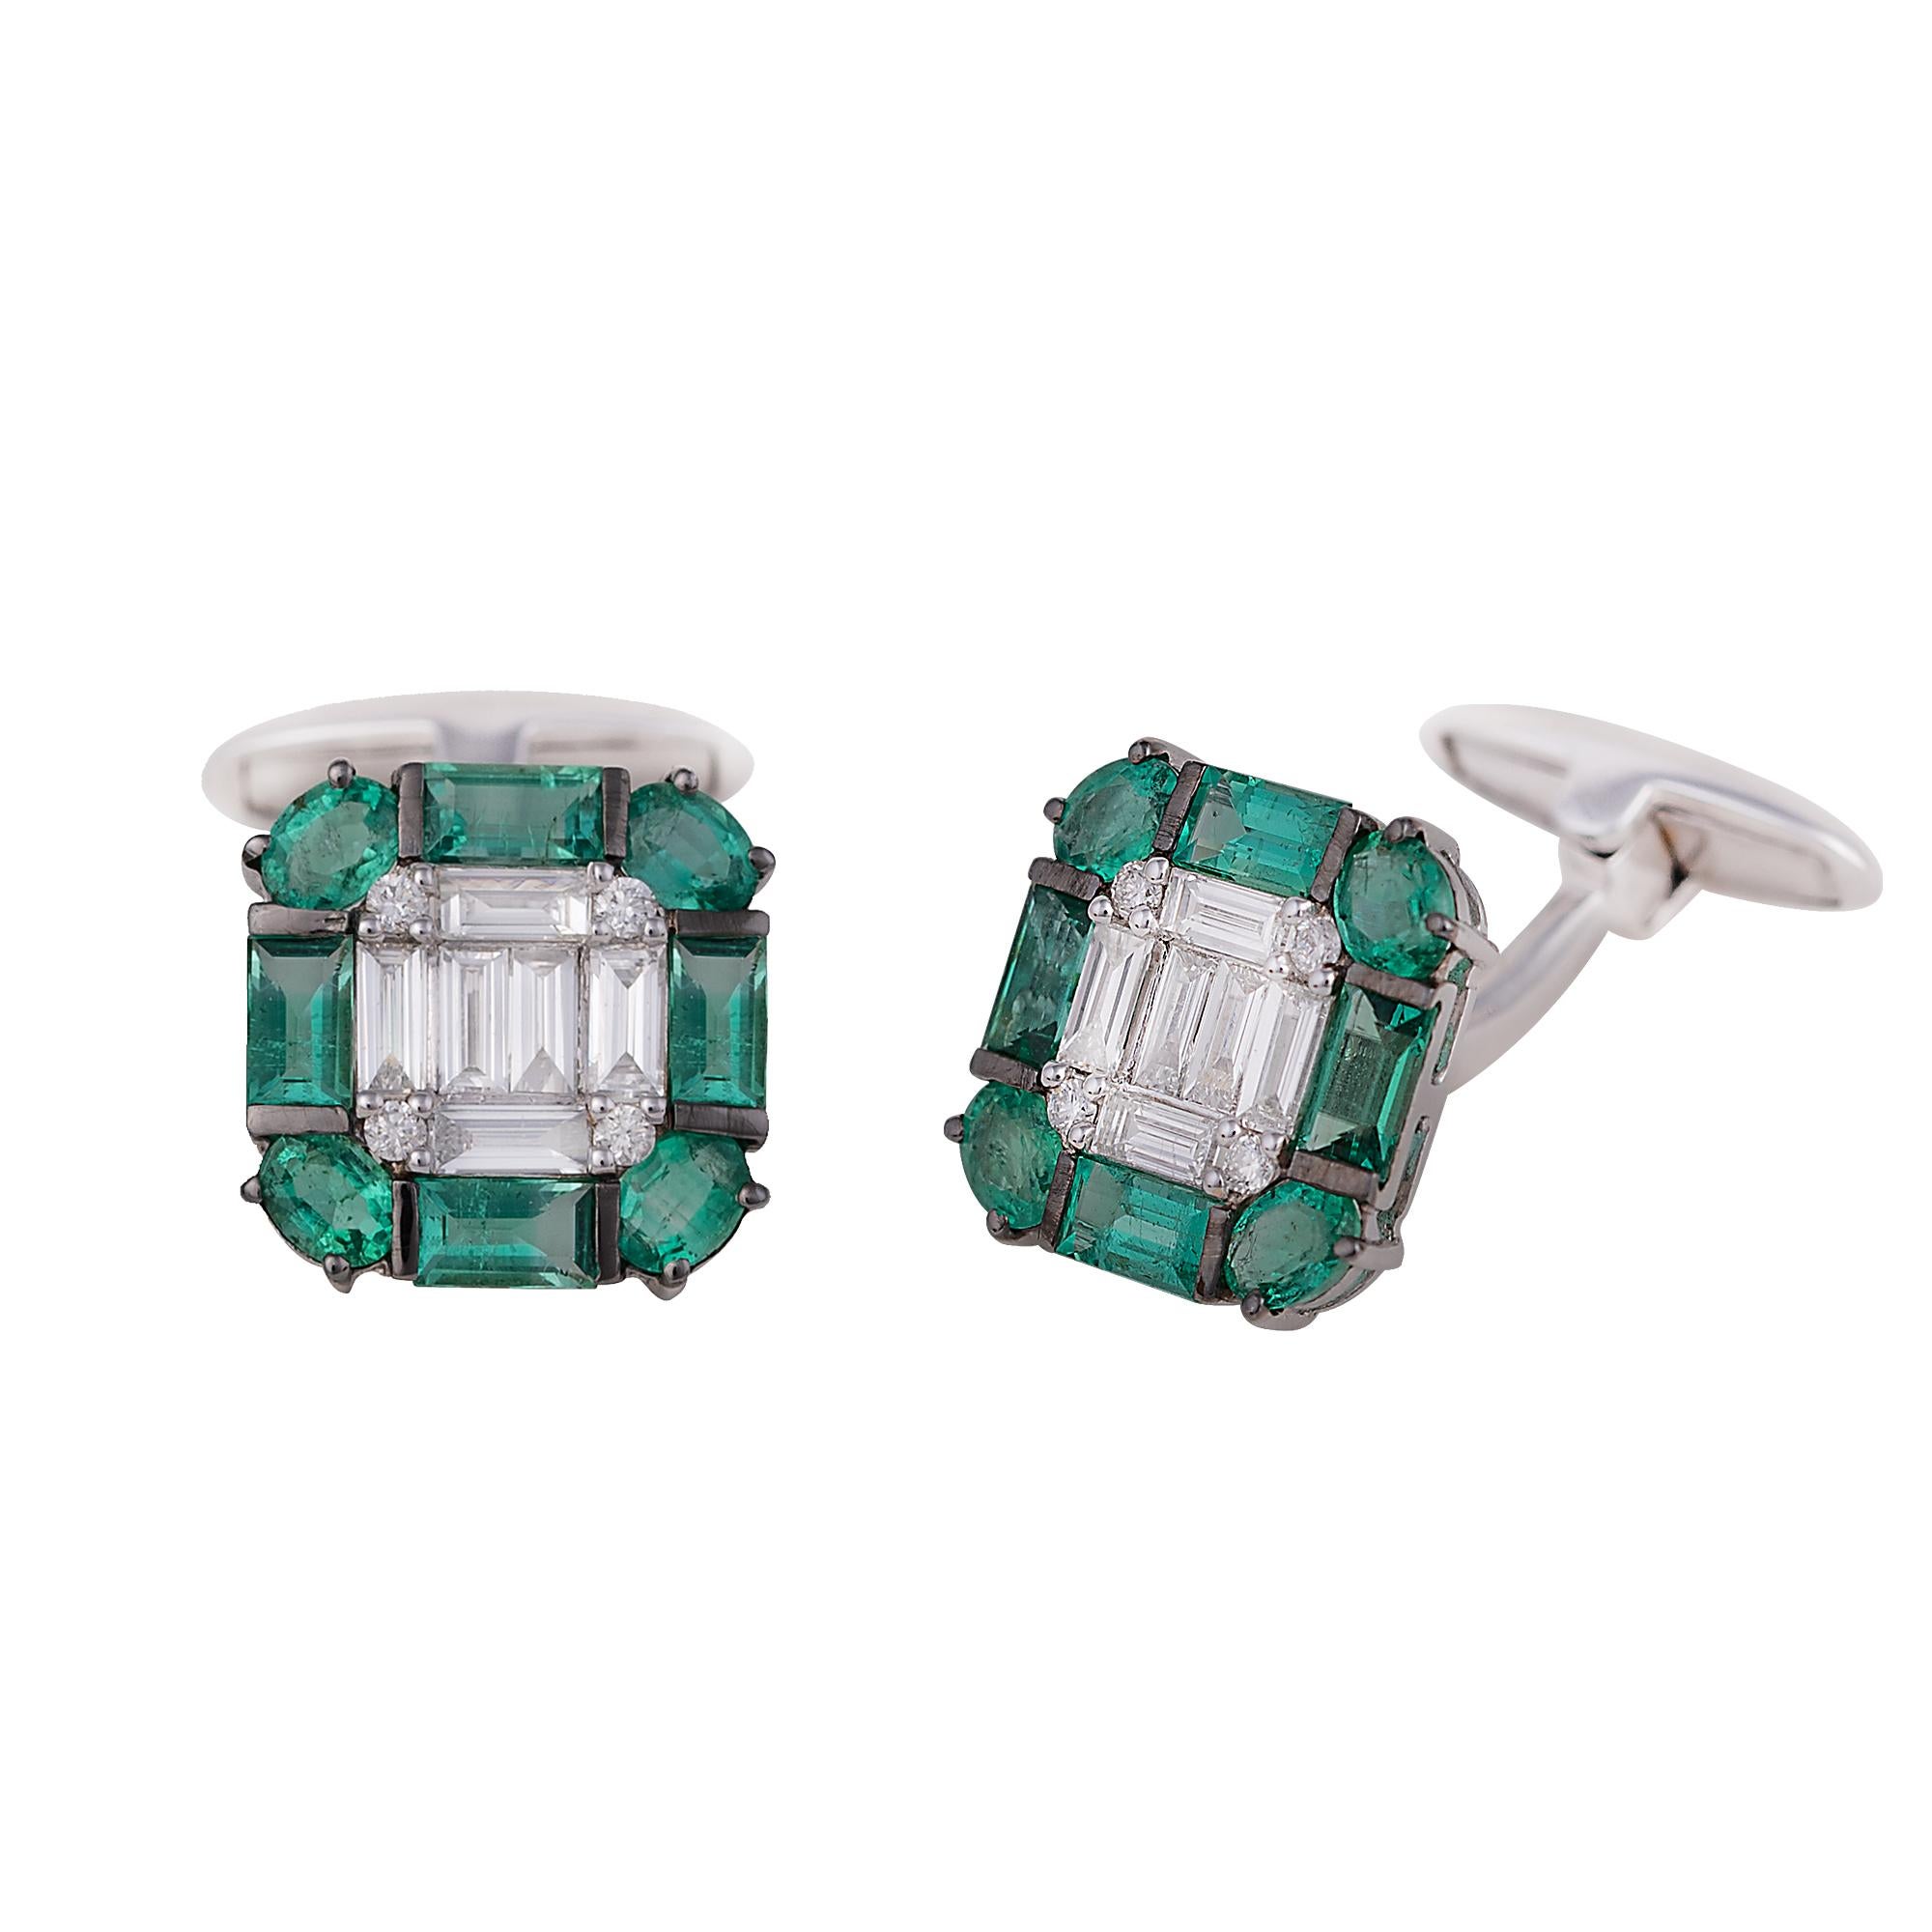 18 Karat White Gold Emerald and Diamond Cufflinks
This spectacular jade green emerald and diamond invisible setting cufflink is extraordinary. The center invisible setting diamond cushion cut is a crafty design wherein 6 smaller baguette cut